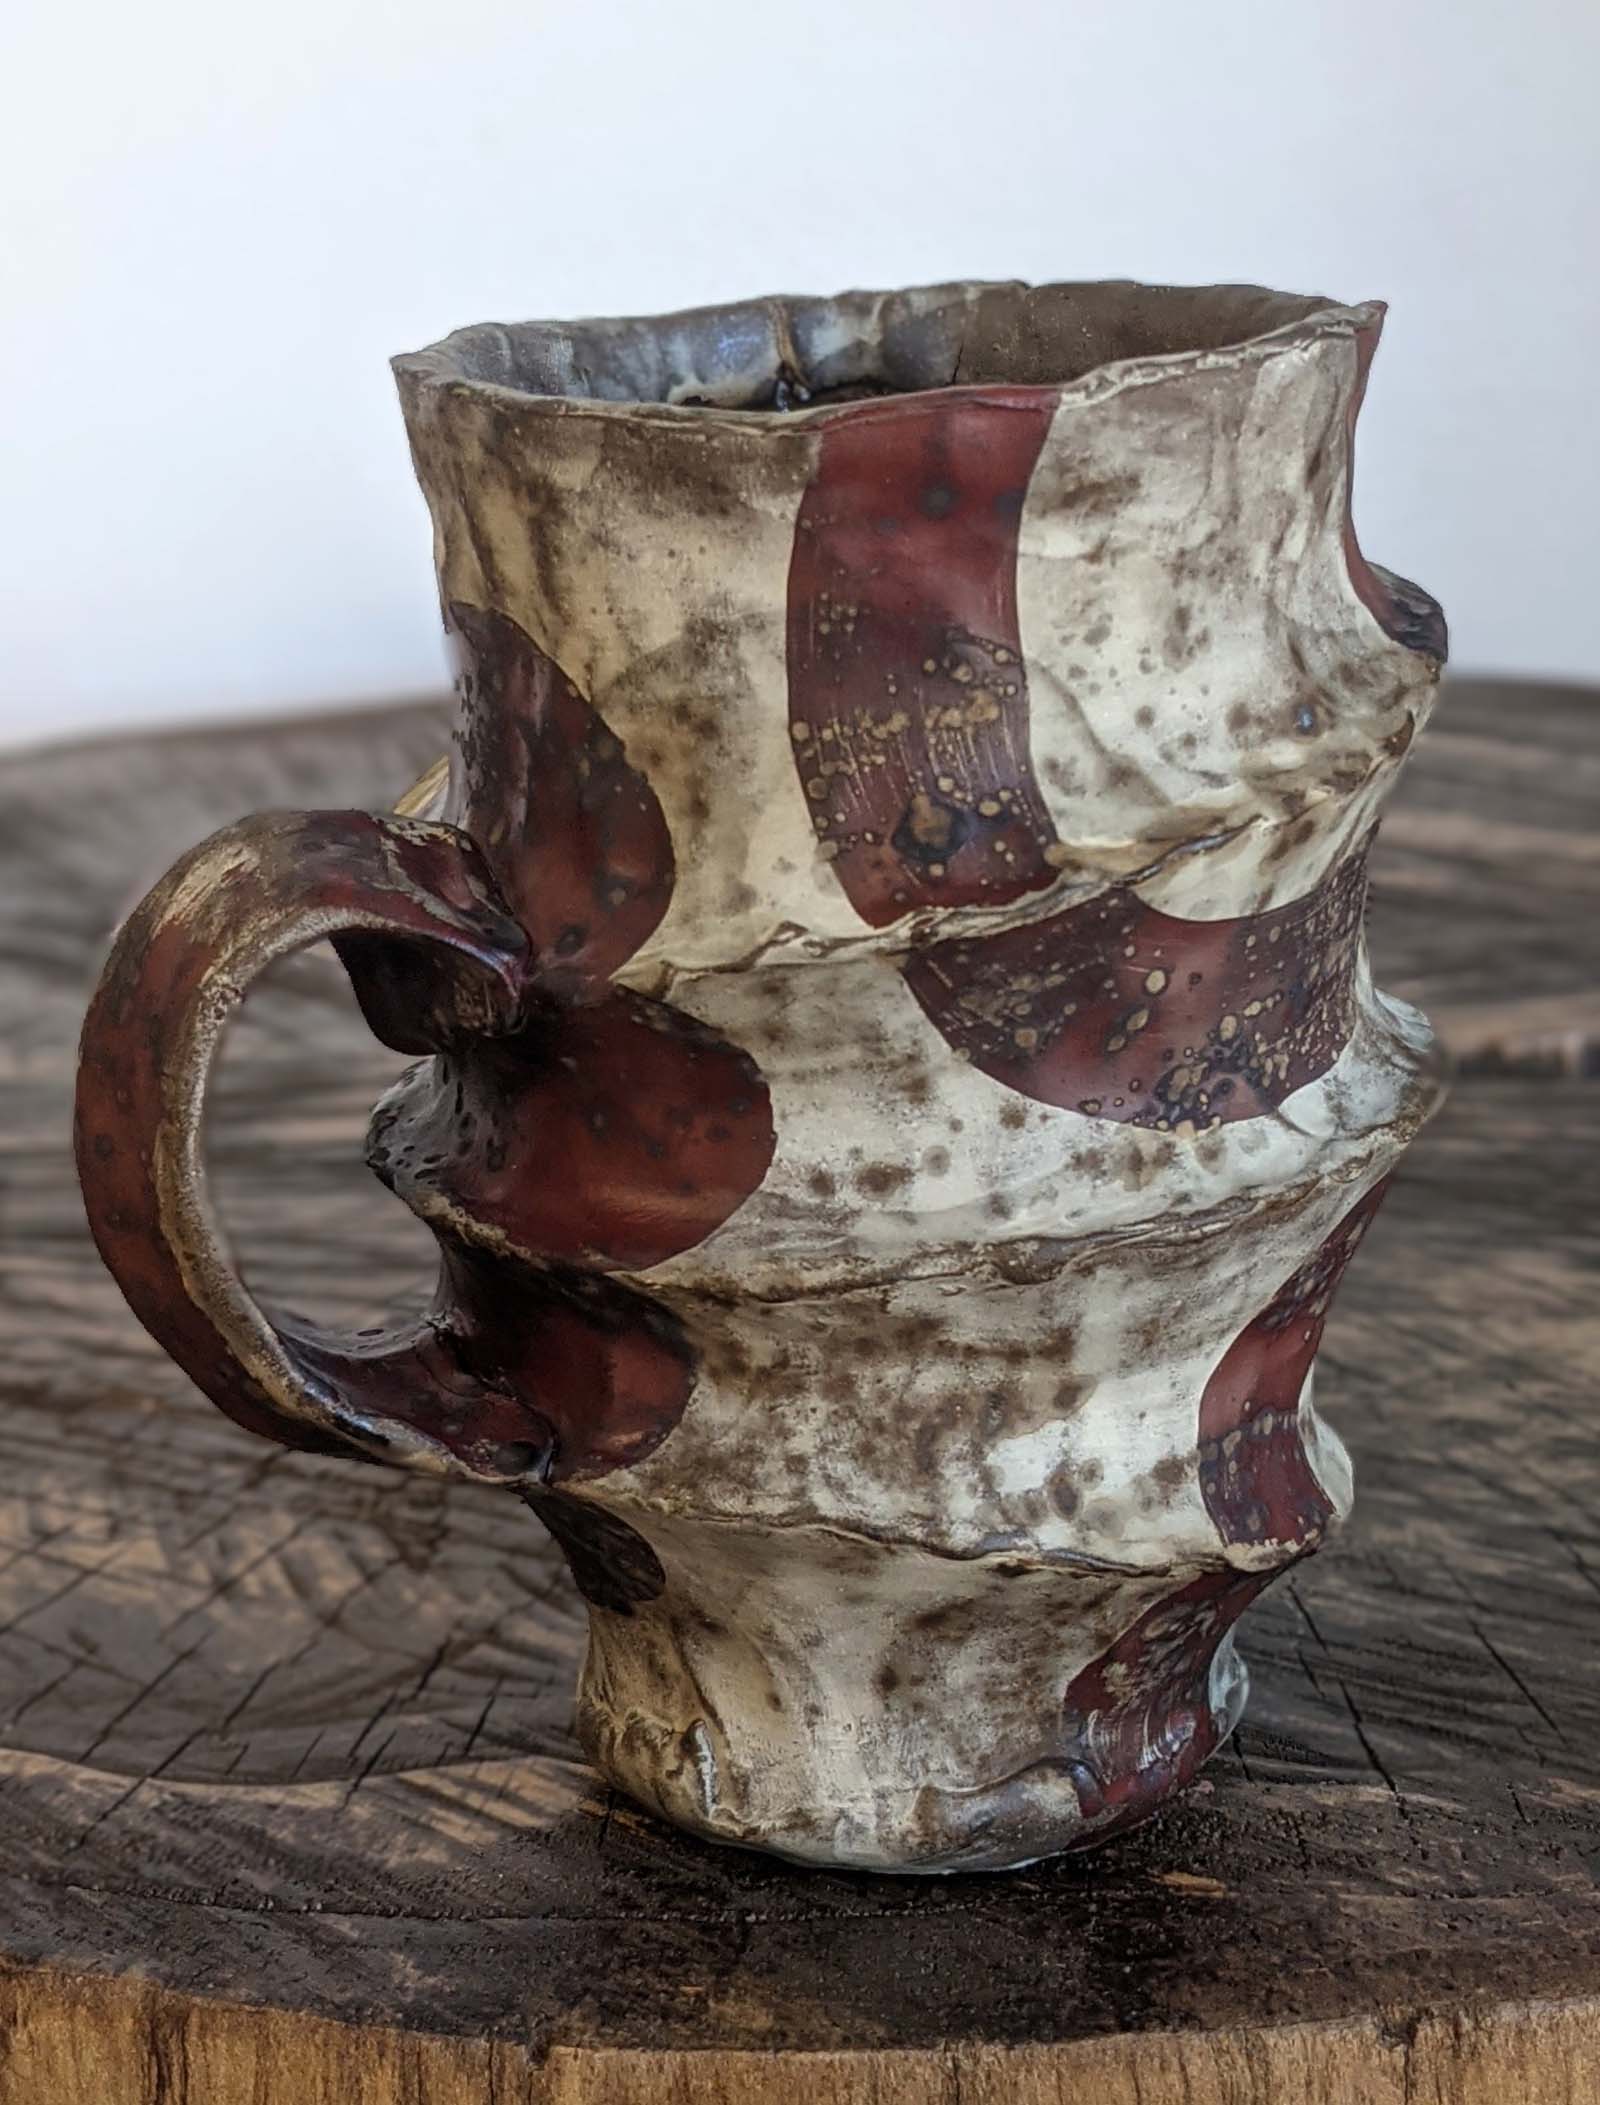 Kate Marotz, Stone Gray mug, 5.25 in. (13 cm) in height, pinched stoneware, terra sigillata, glaze, fired to cone 4 in an electric kiln